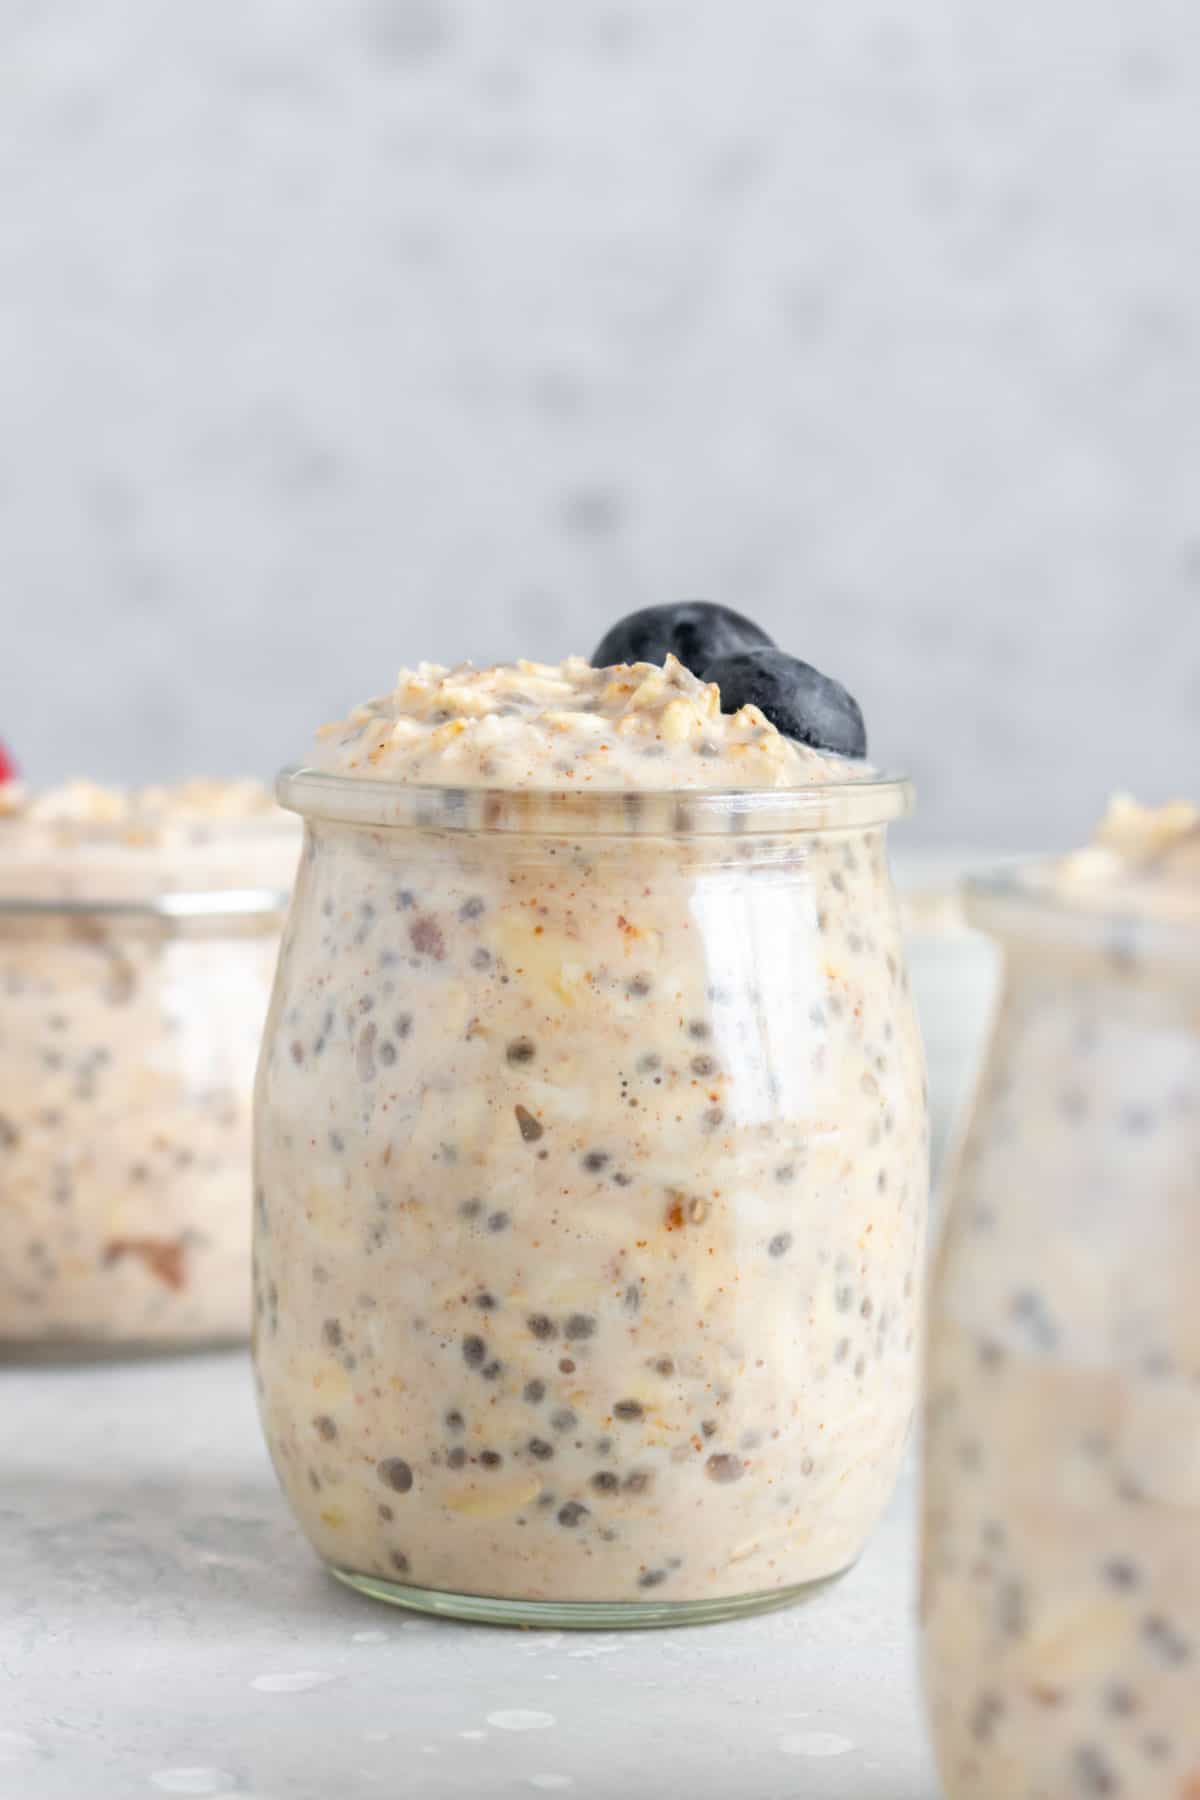 A jar of almond milk overnight oats topped with two blueberries.